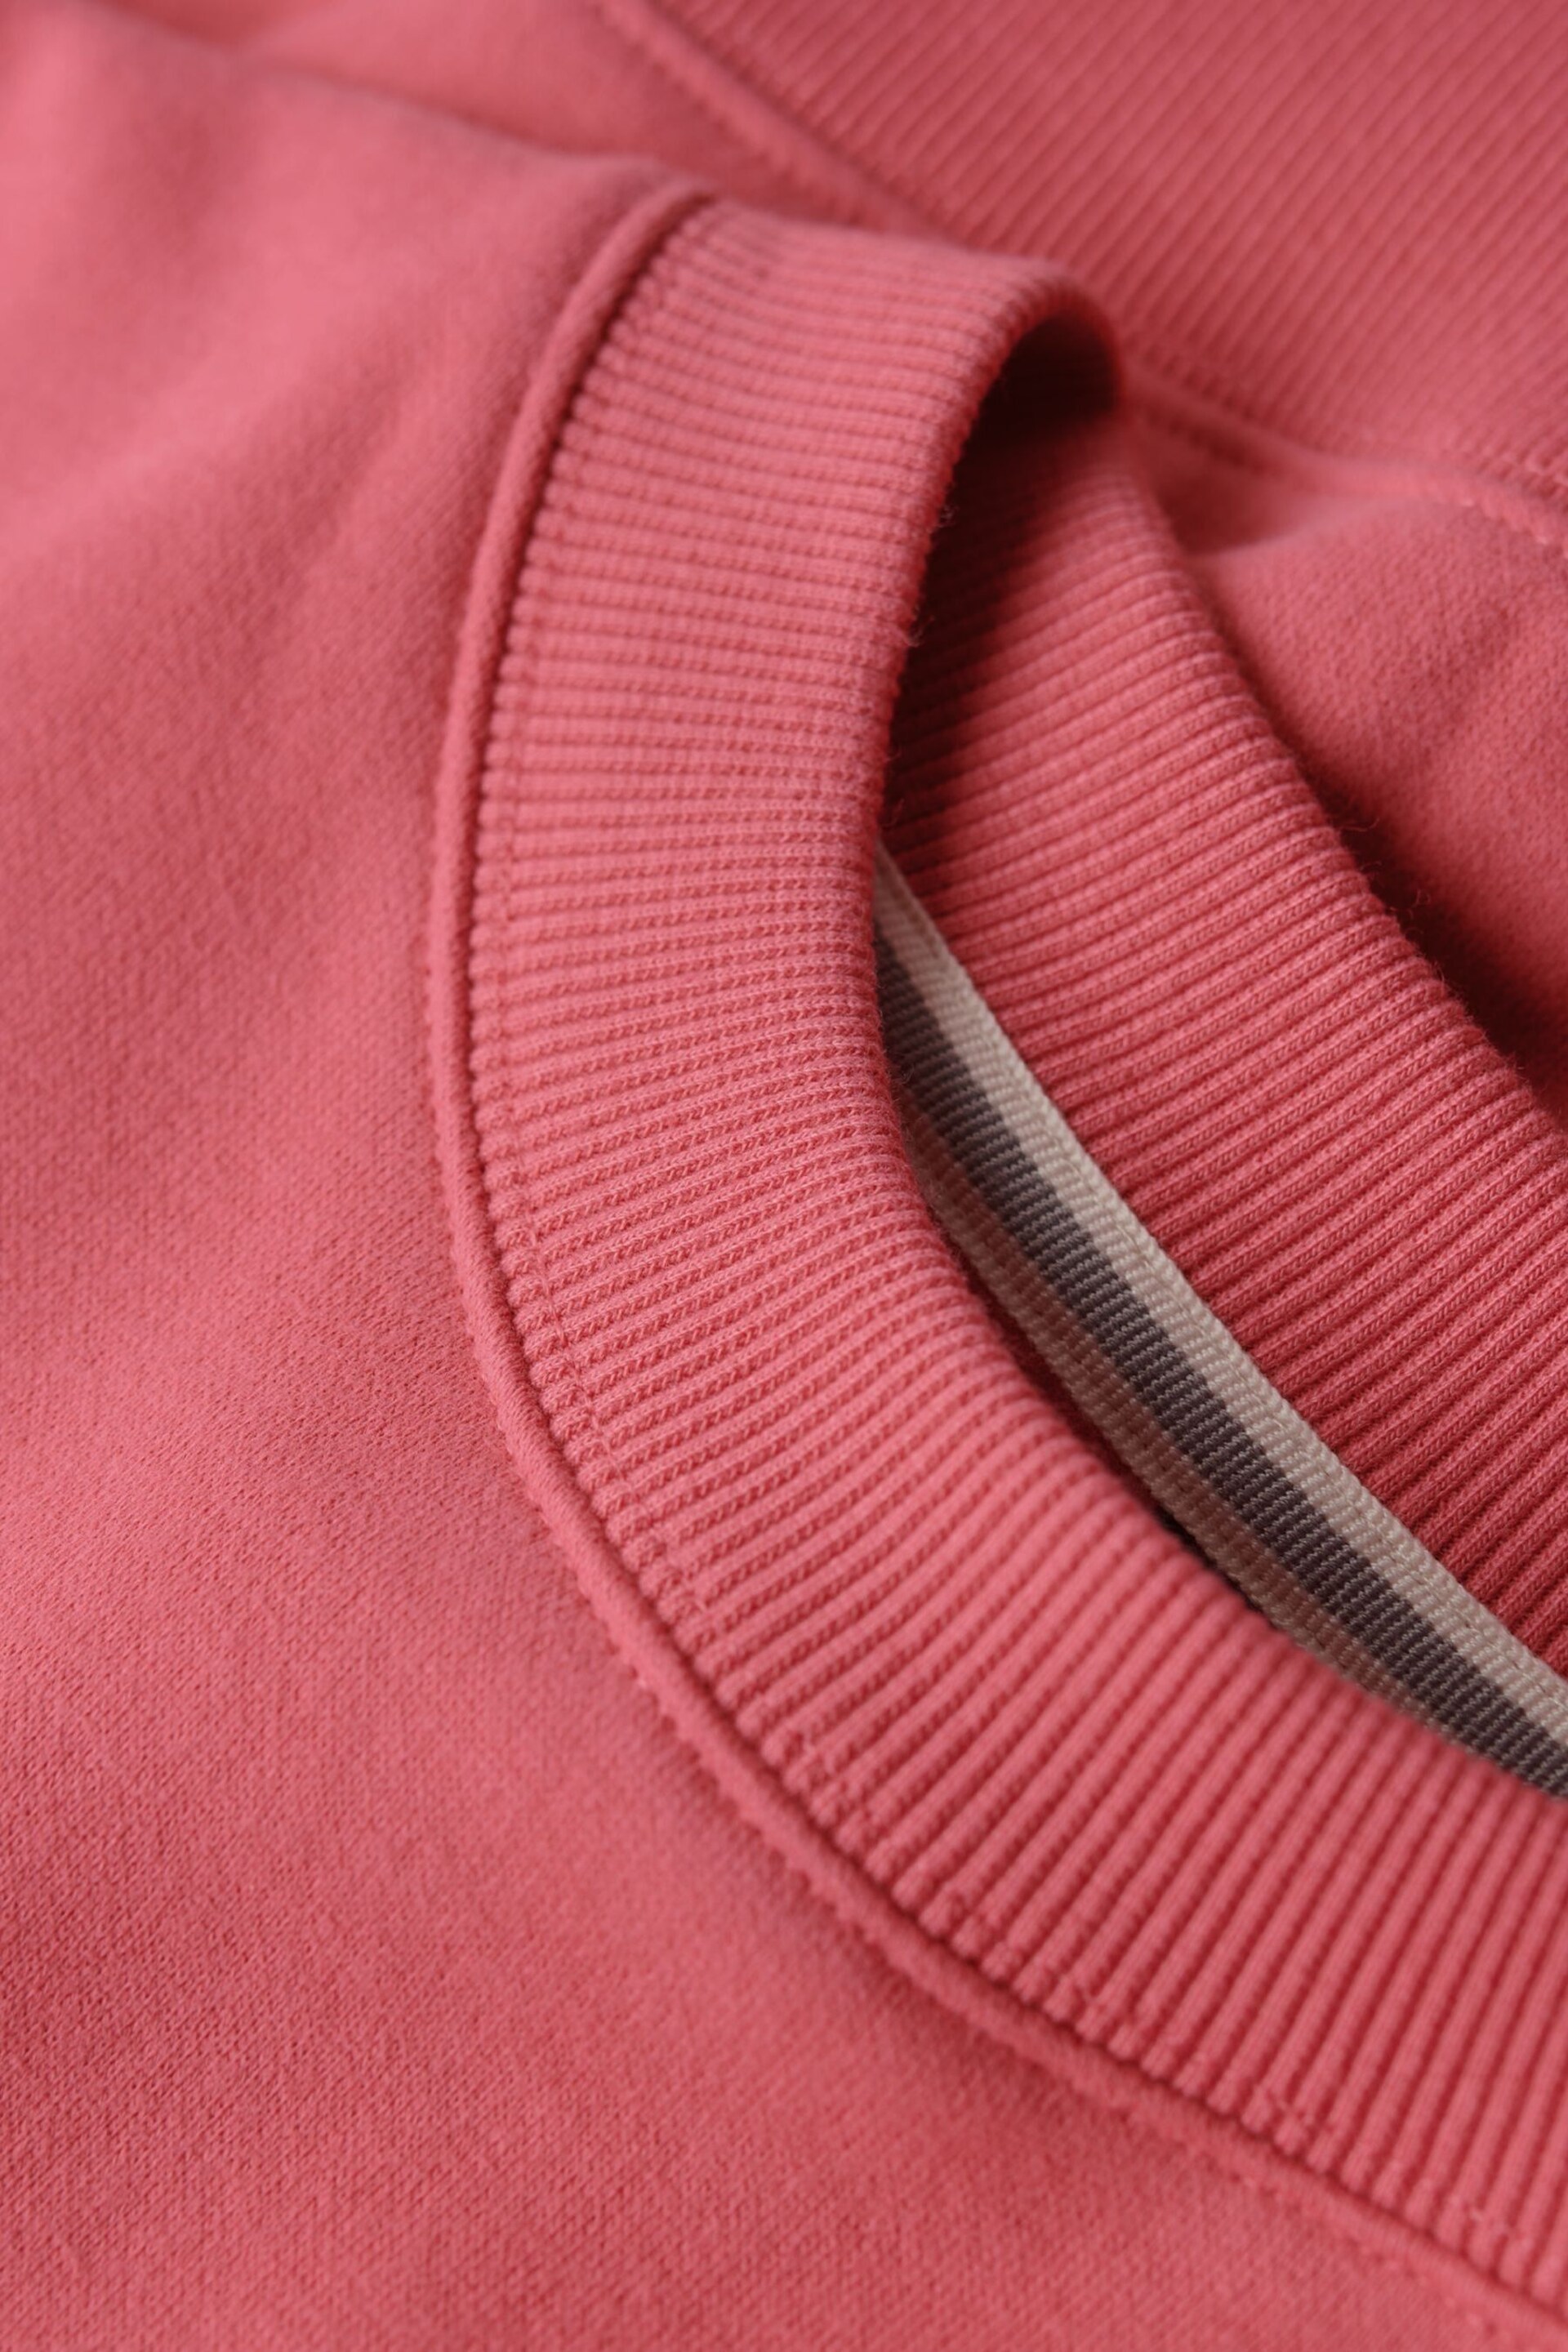 Superdry Pink Essential Logo Relaxed Fit Sweatshirt - Image 5 of 6